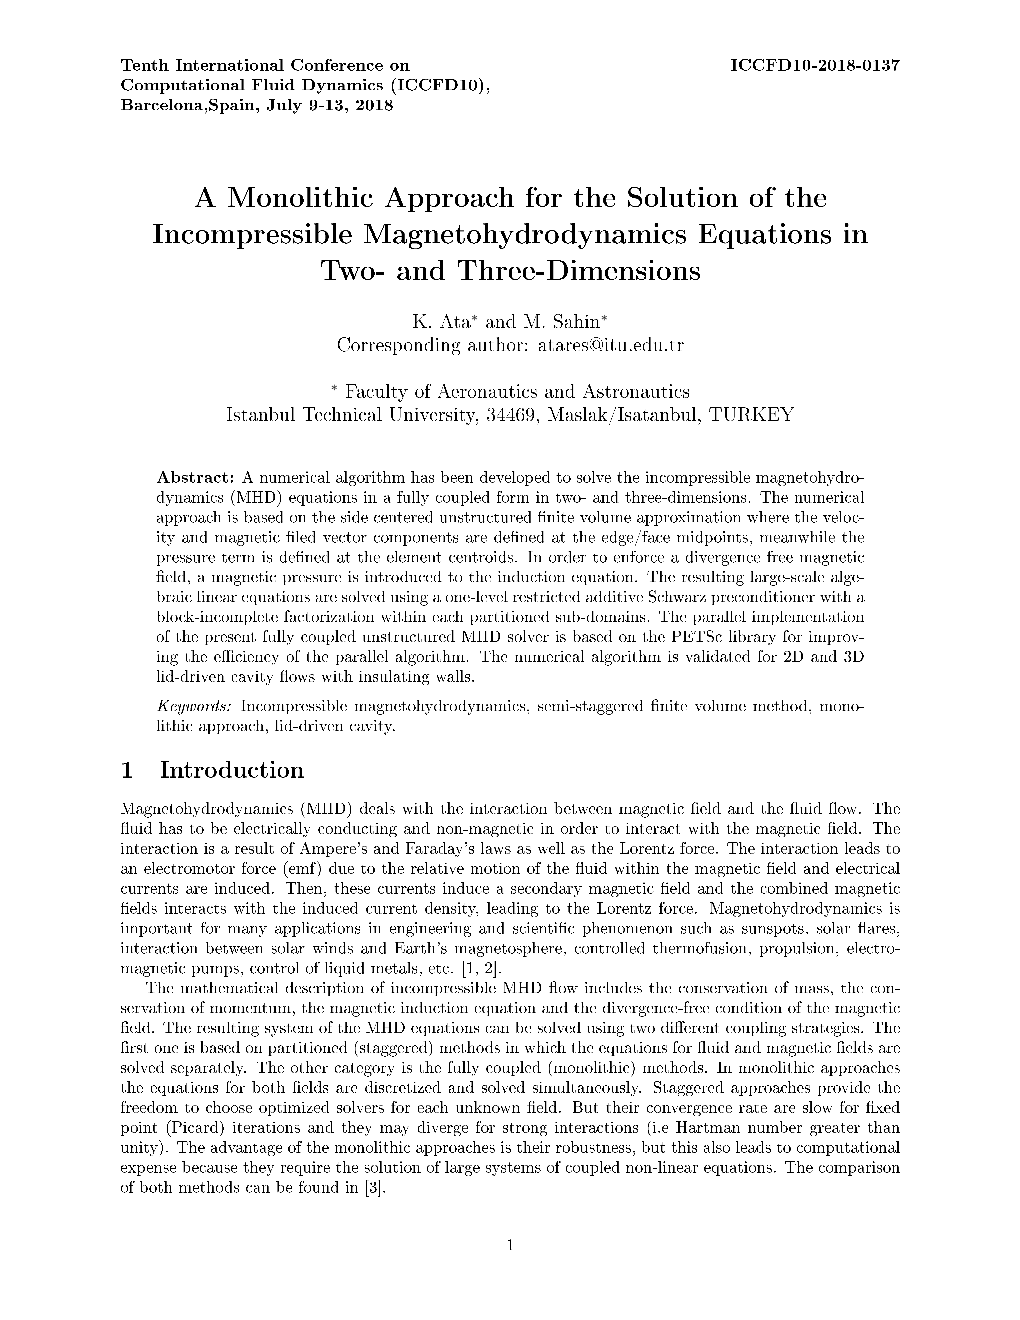 A Monolithic Approach for the Solution of the Incompressible Magnetohydrodynamics Equations in Two- and Three-Dimensions